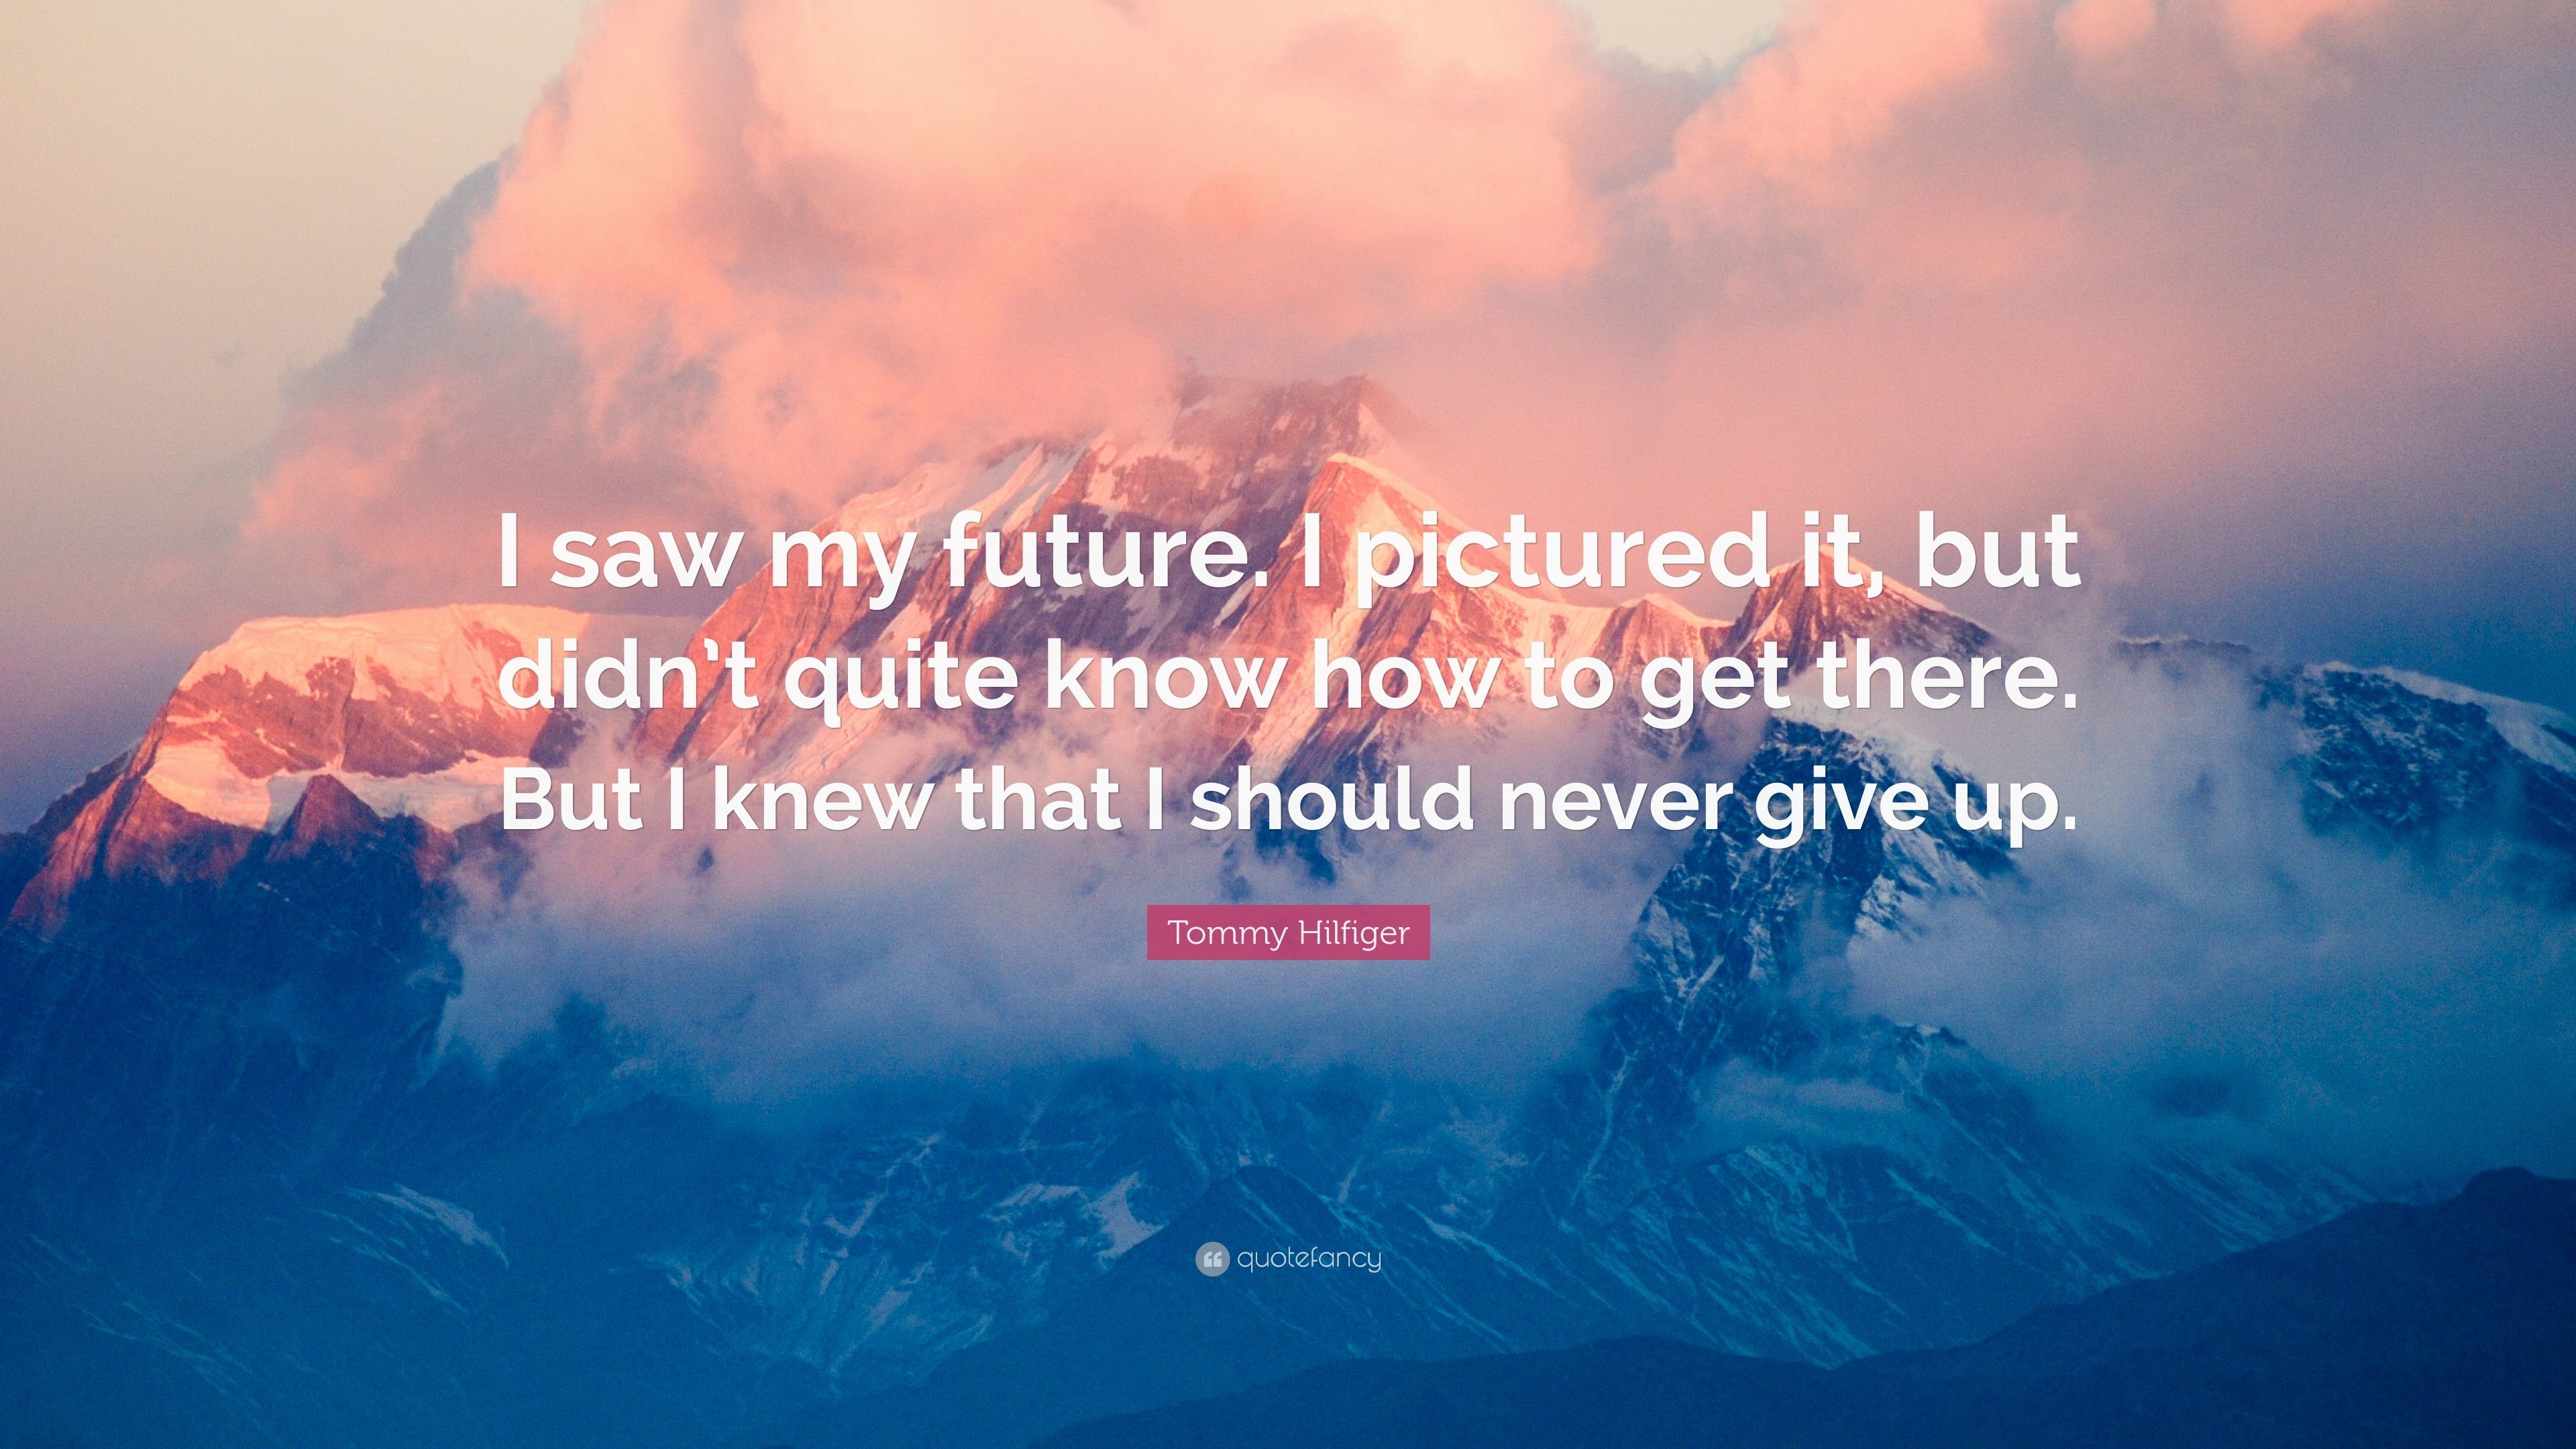 3840x2160 Tommy Hilfiger Quote: “I saw my future. I pictured it, but didn